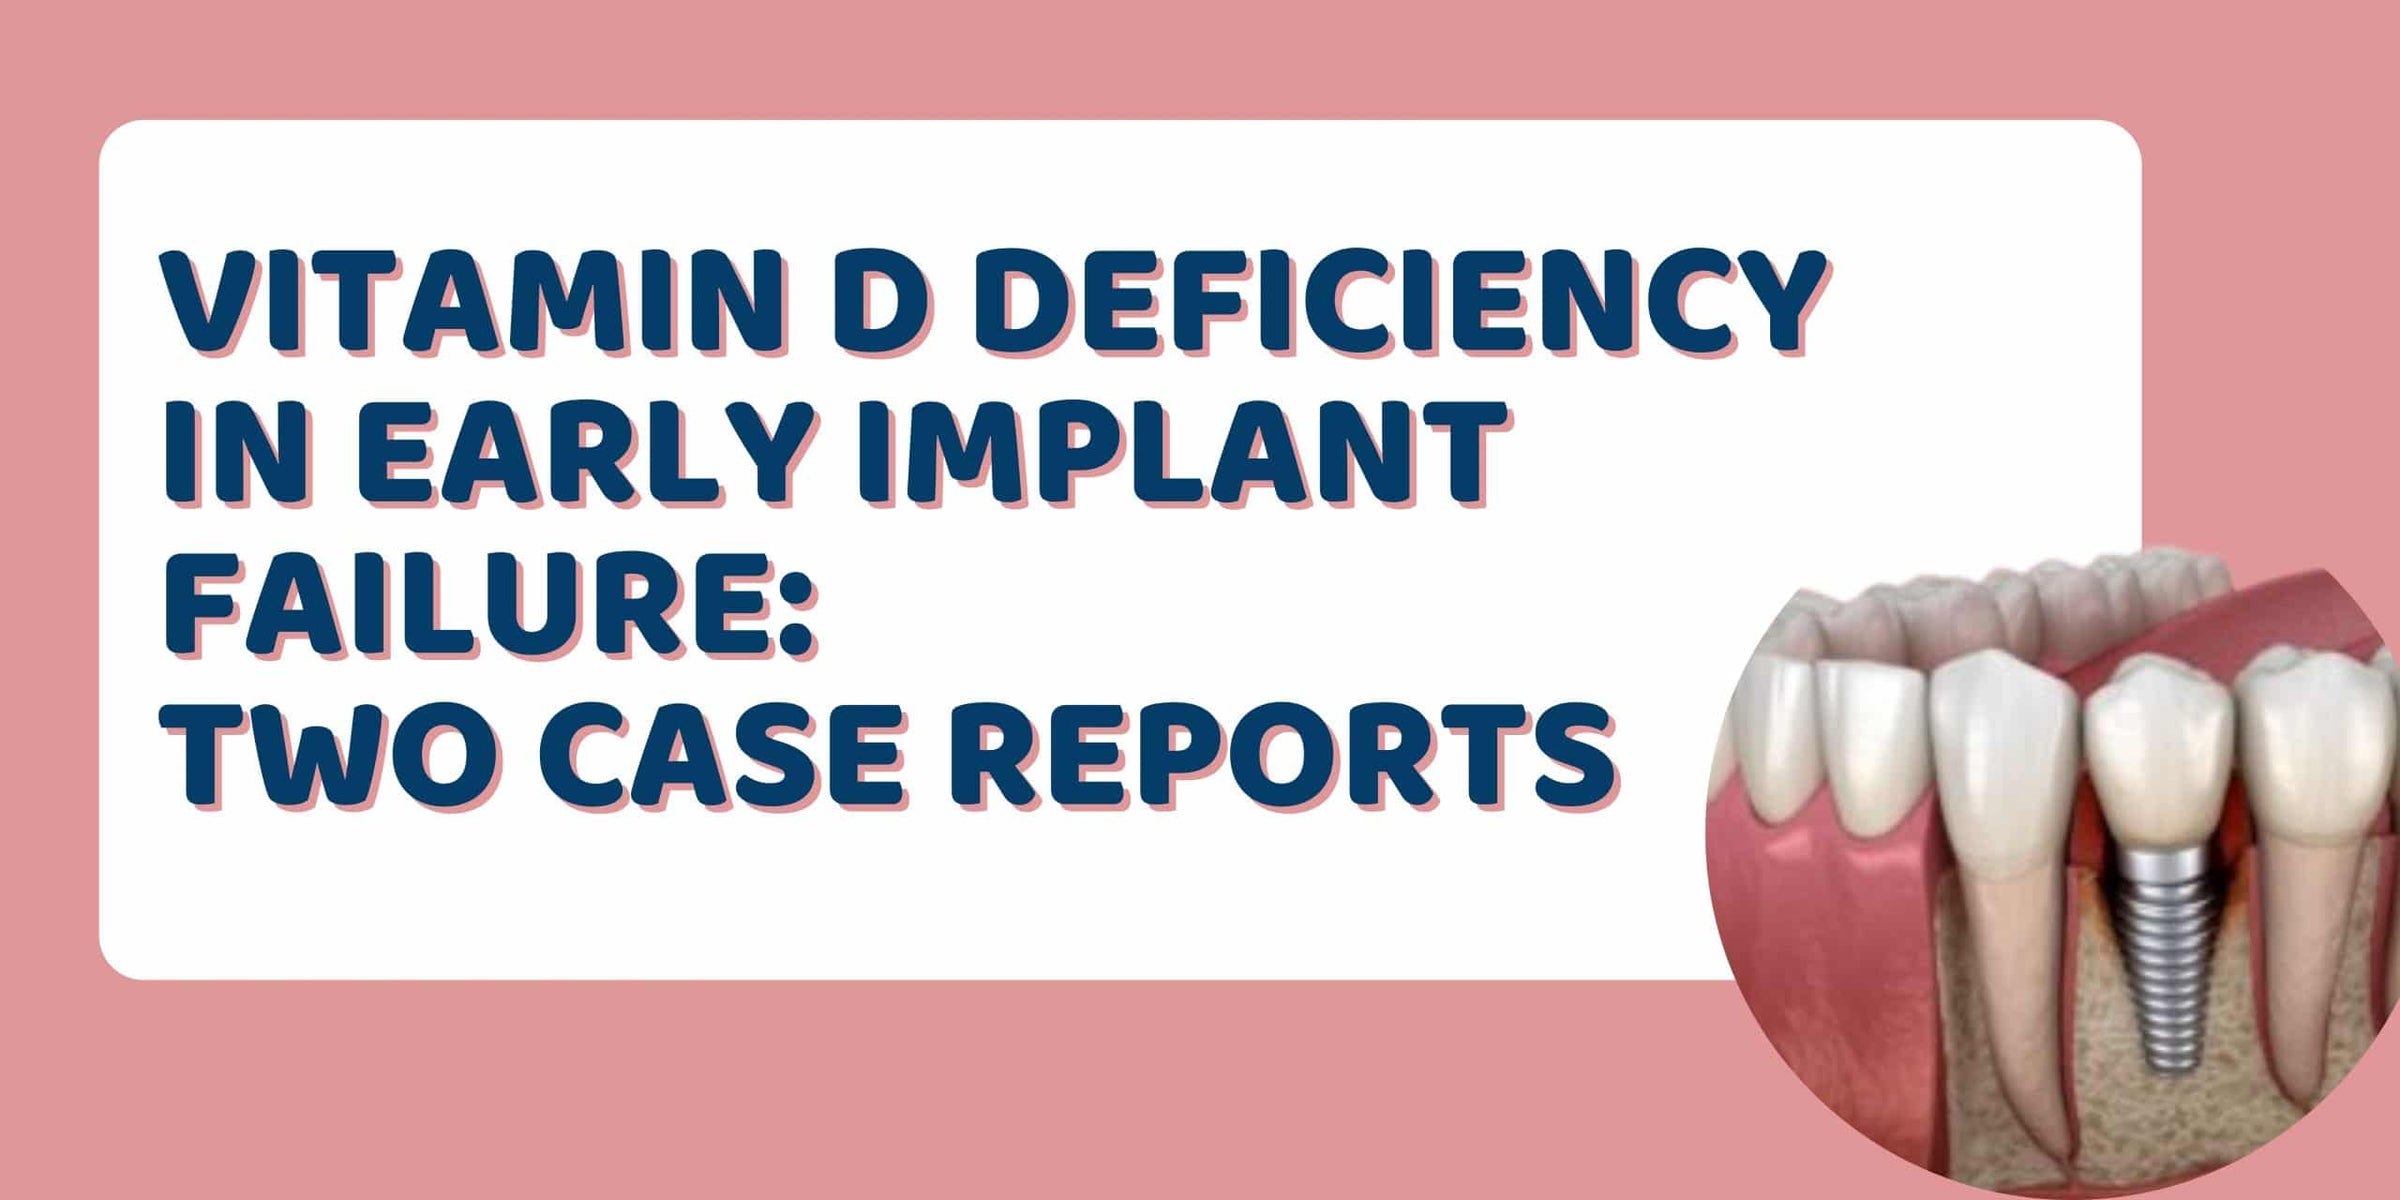 Vitamin D deficiency in Early Implant Failure: Two Case Reports Image